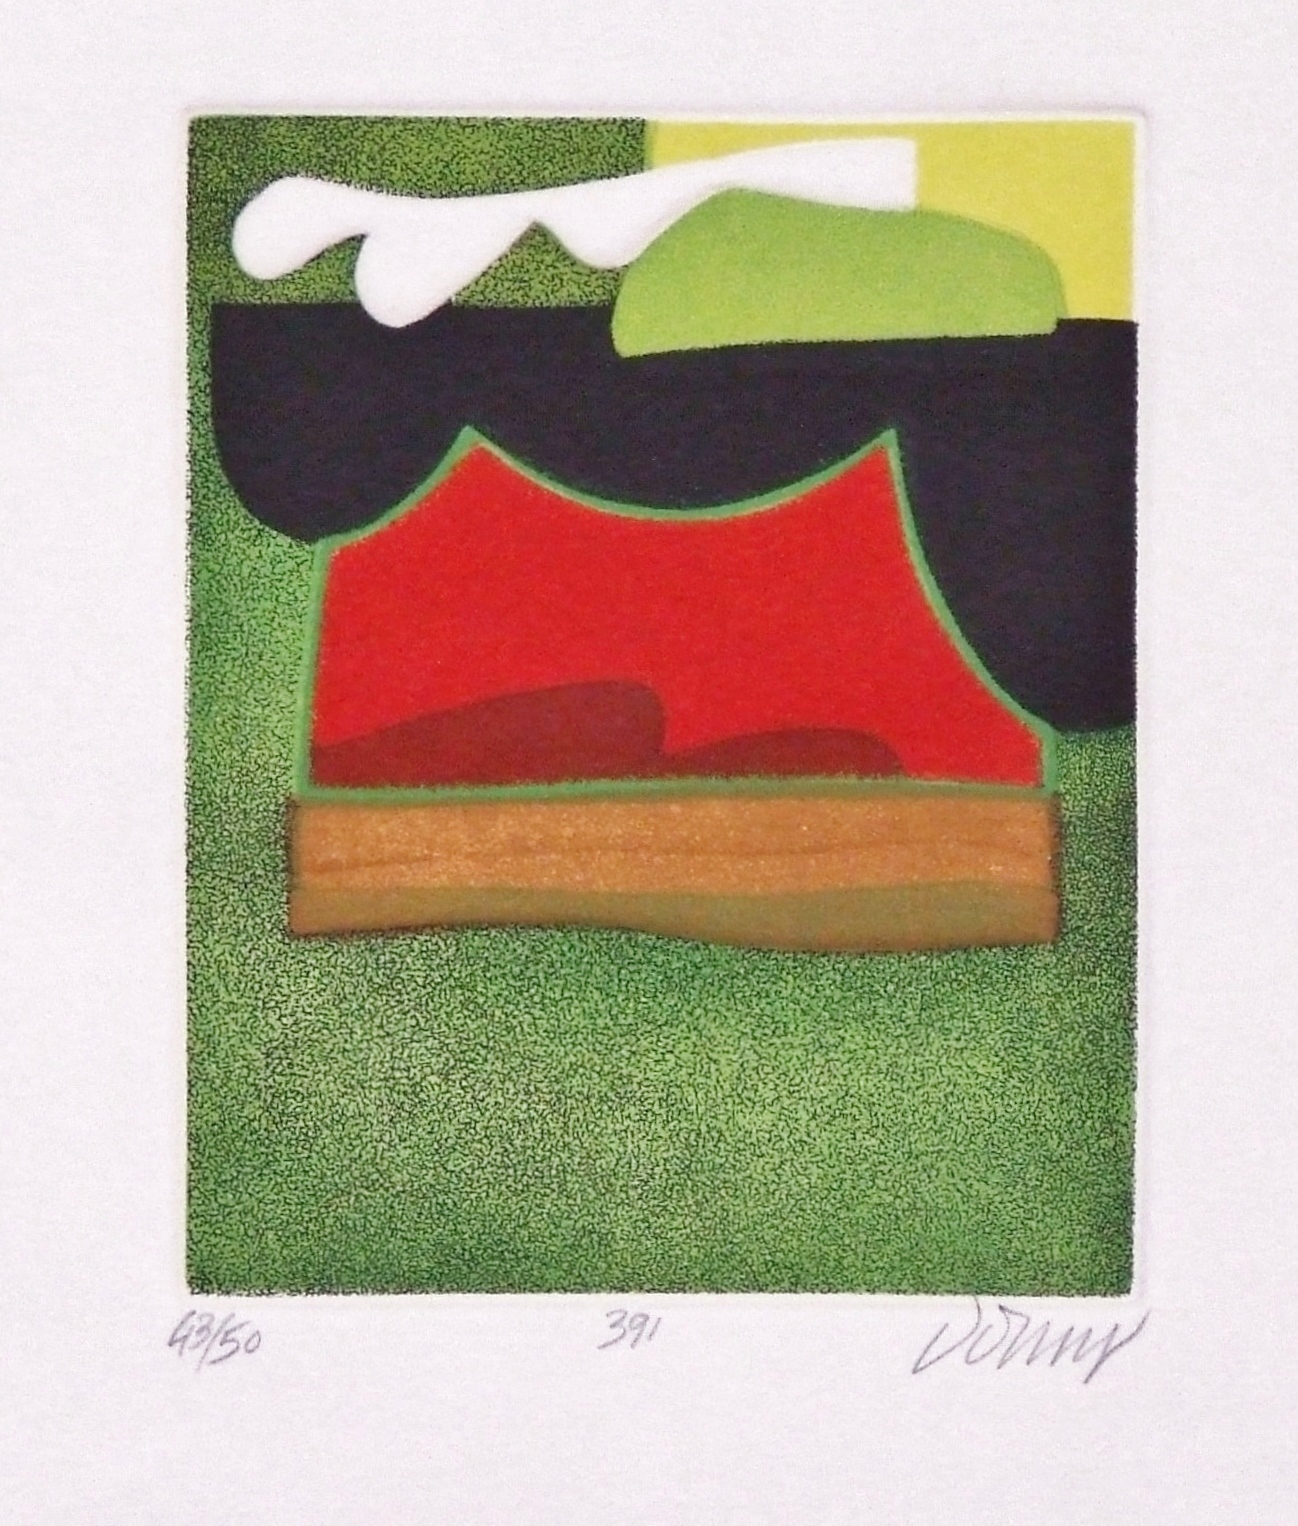 Embosssed colour etching (Aquatinte) titled 391 by Bertrand DORNY (1931) – 33.02 x 25.4 cm